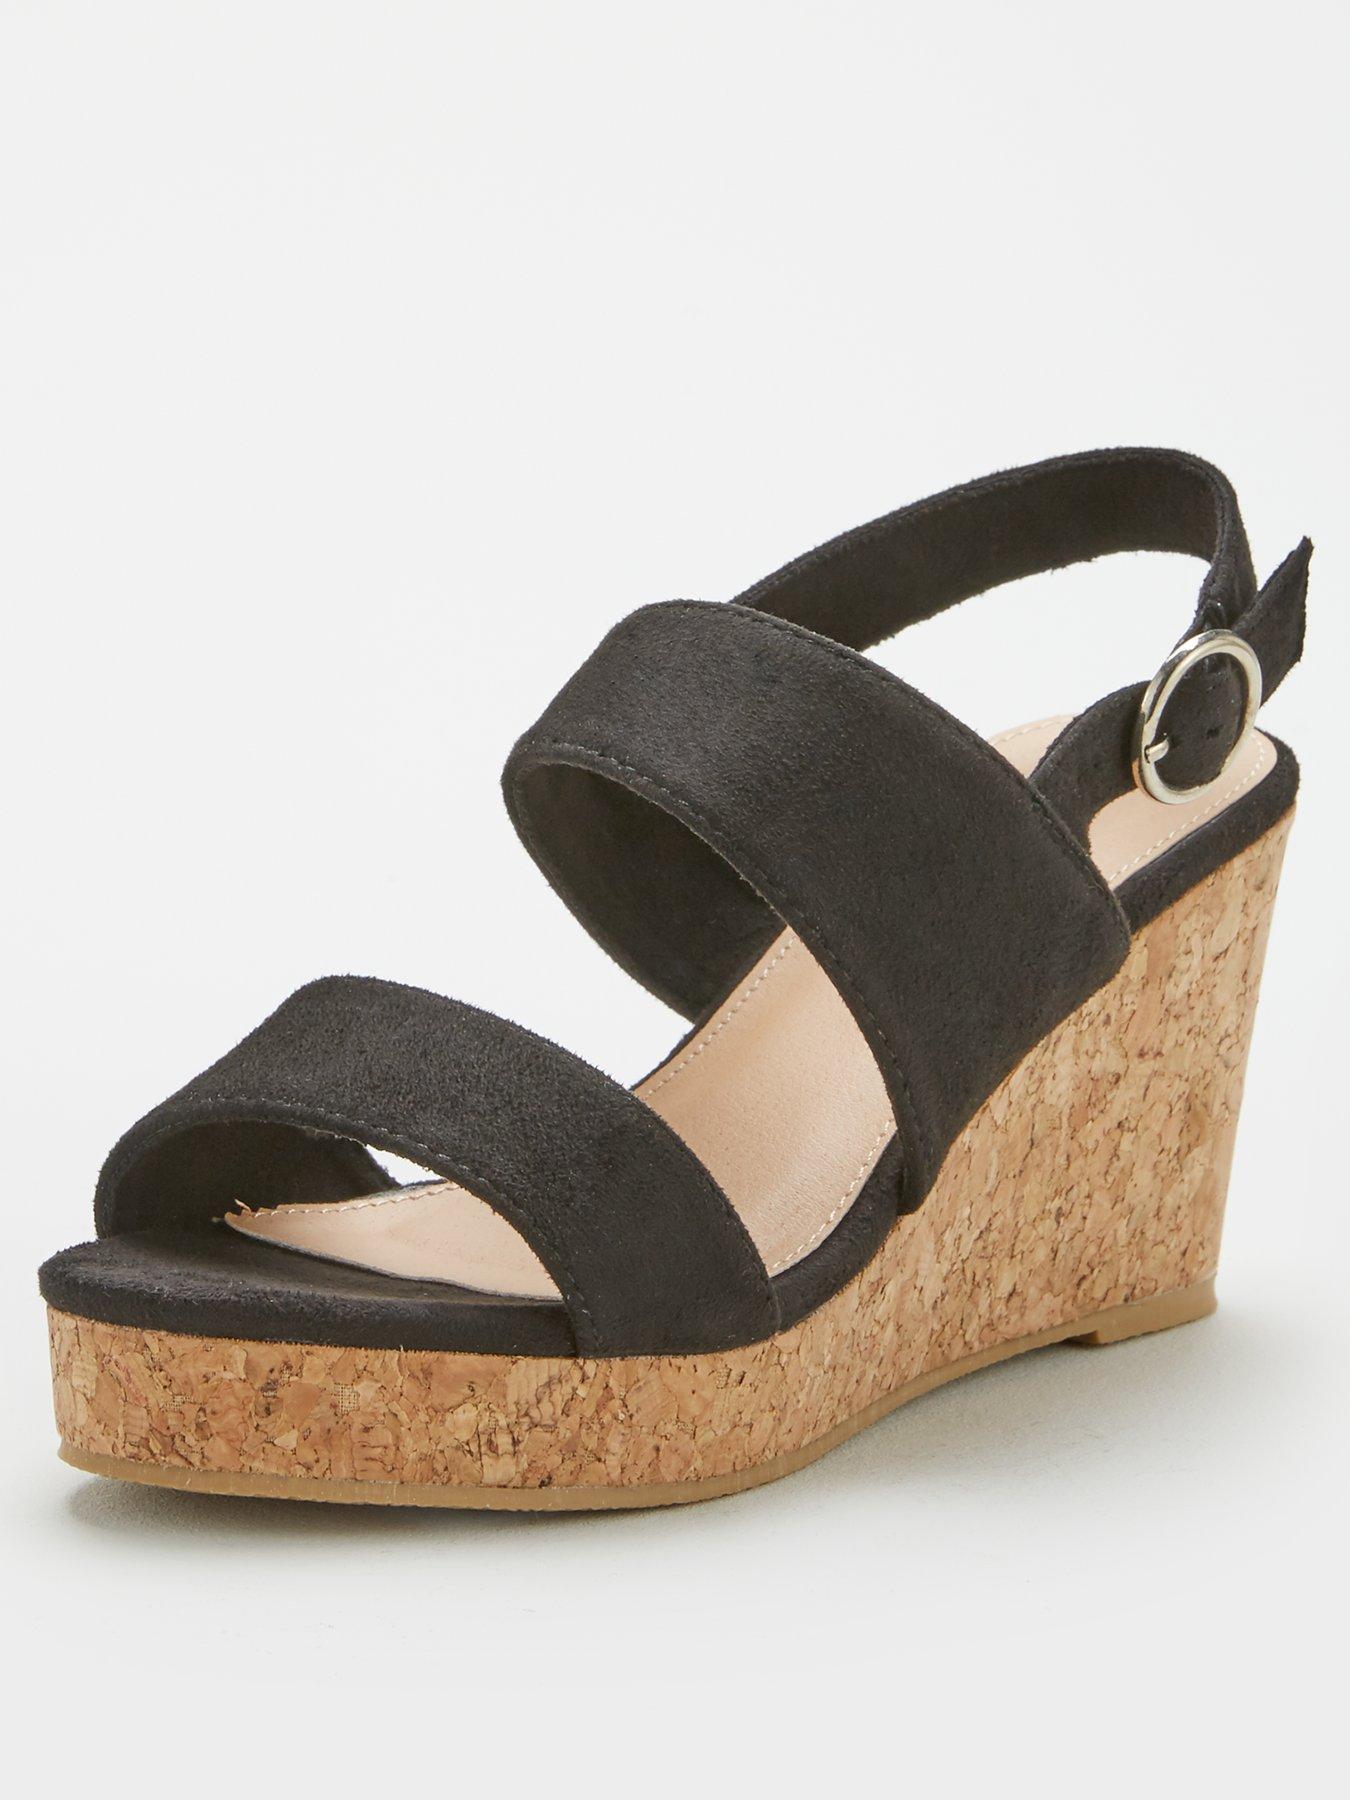 3 inch wedges